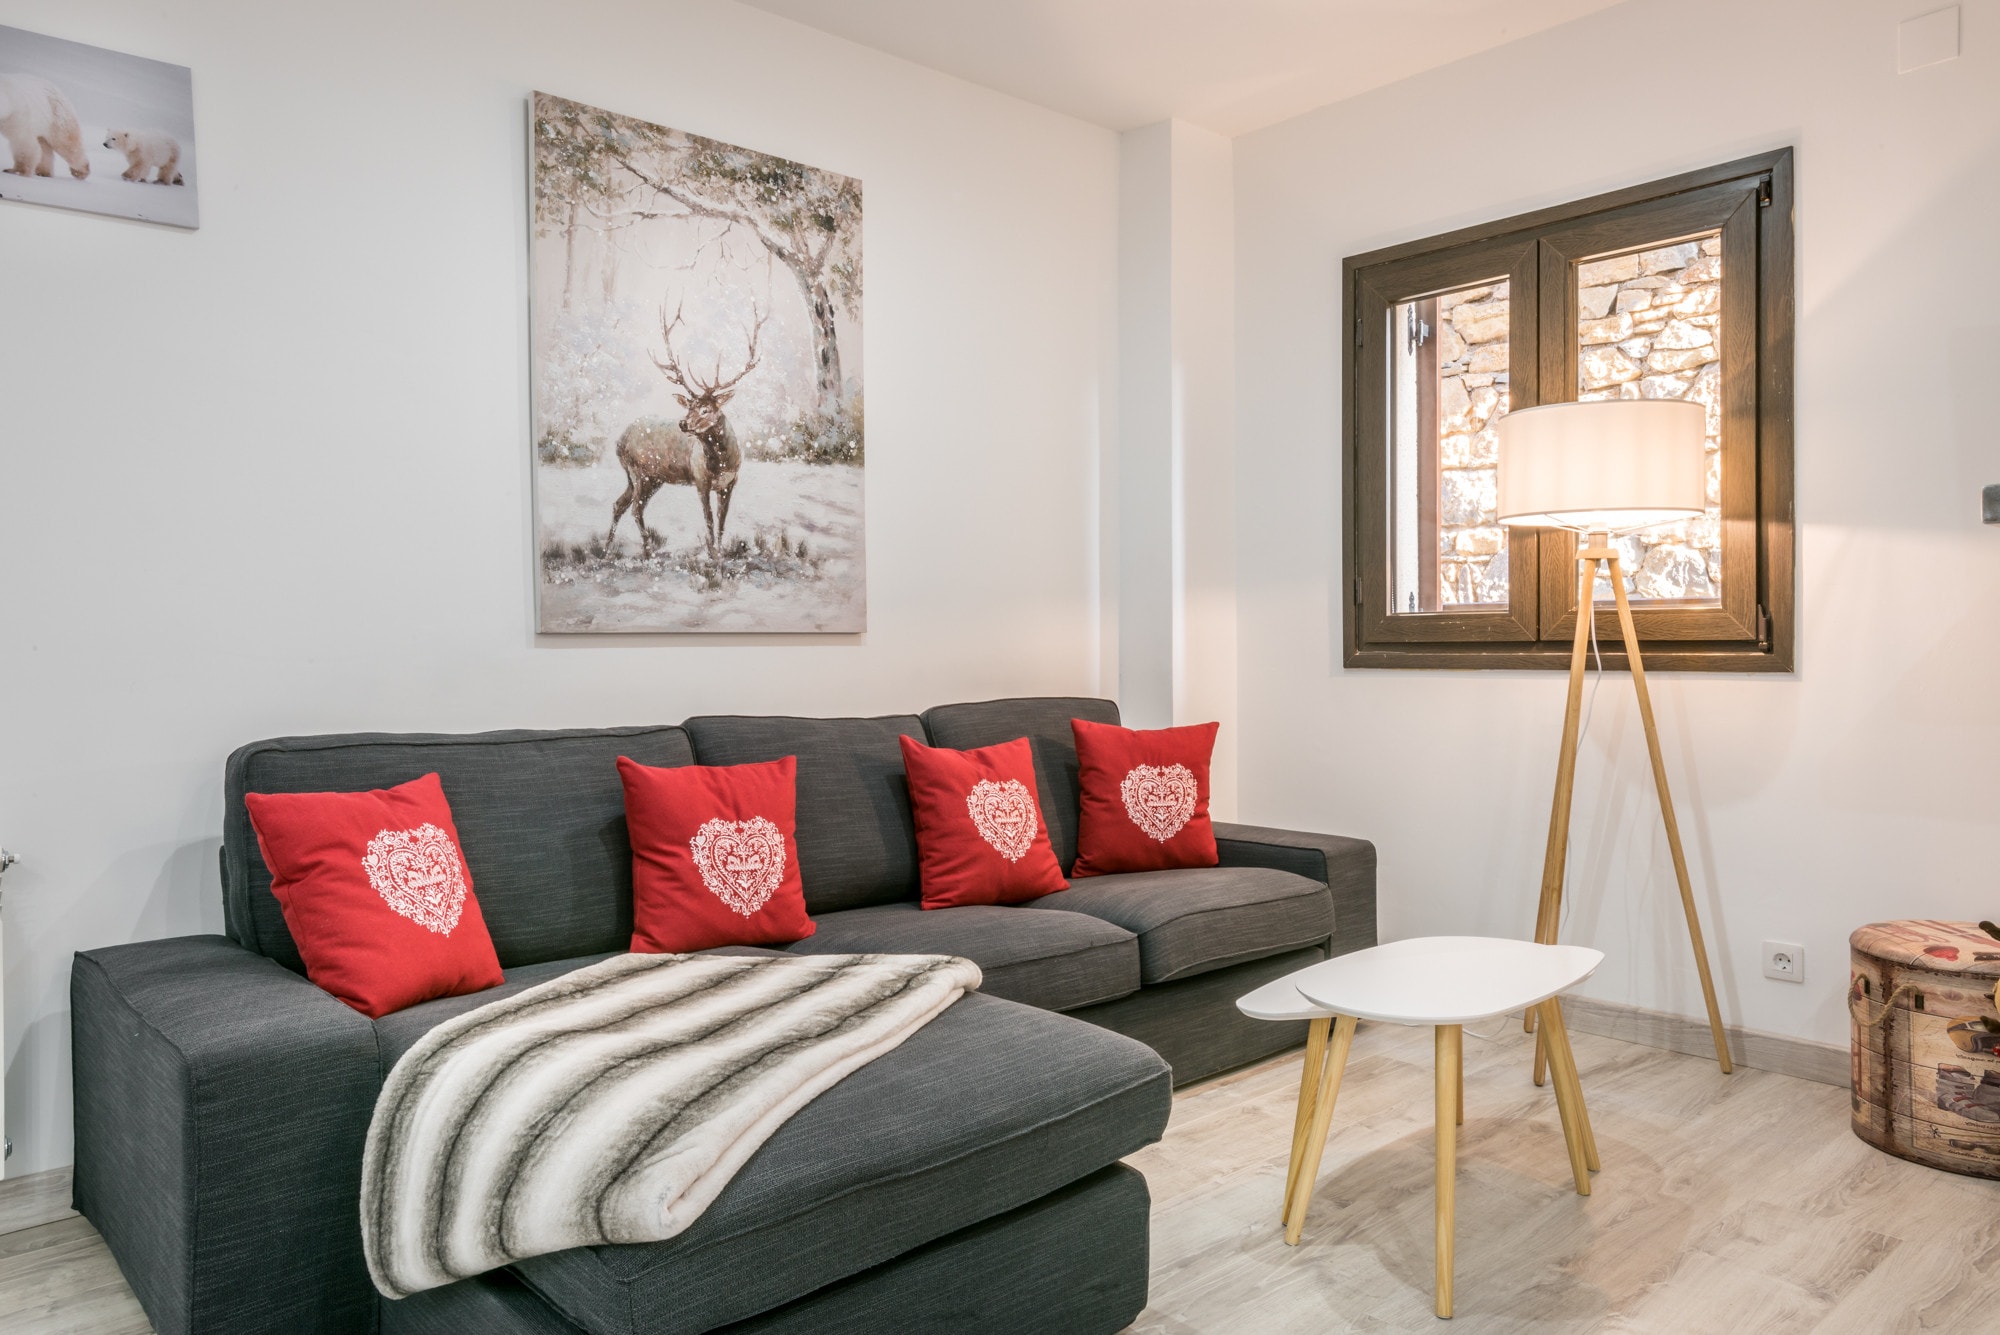 Property Image 2 - Adriana cozy Apartment 2 bedrooms 6 people, in Tanau at Baqueira, next to the chairlift of Esquiros slopes